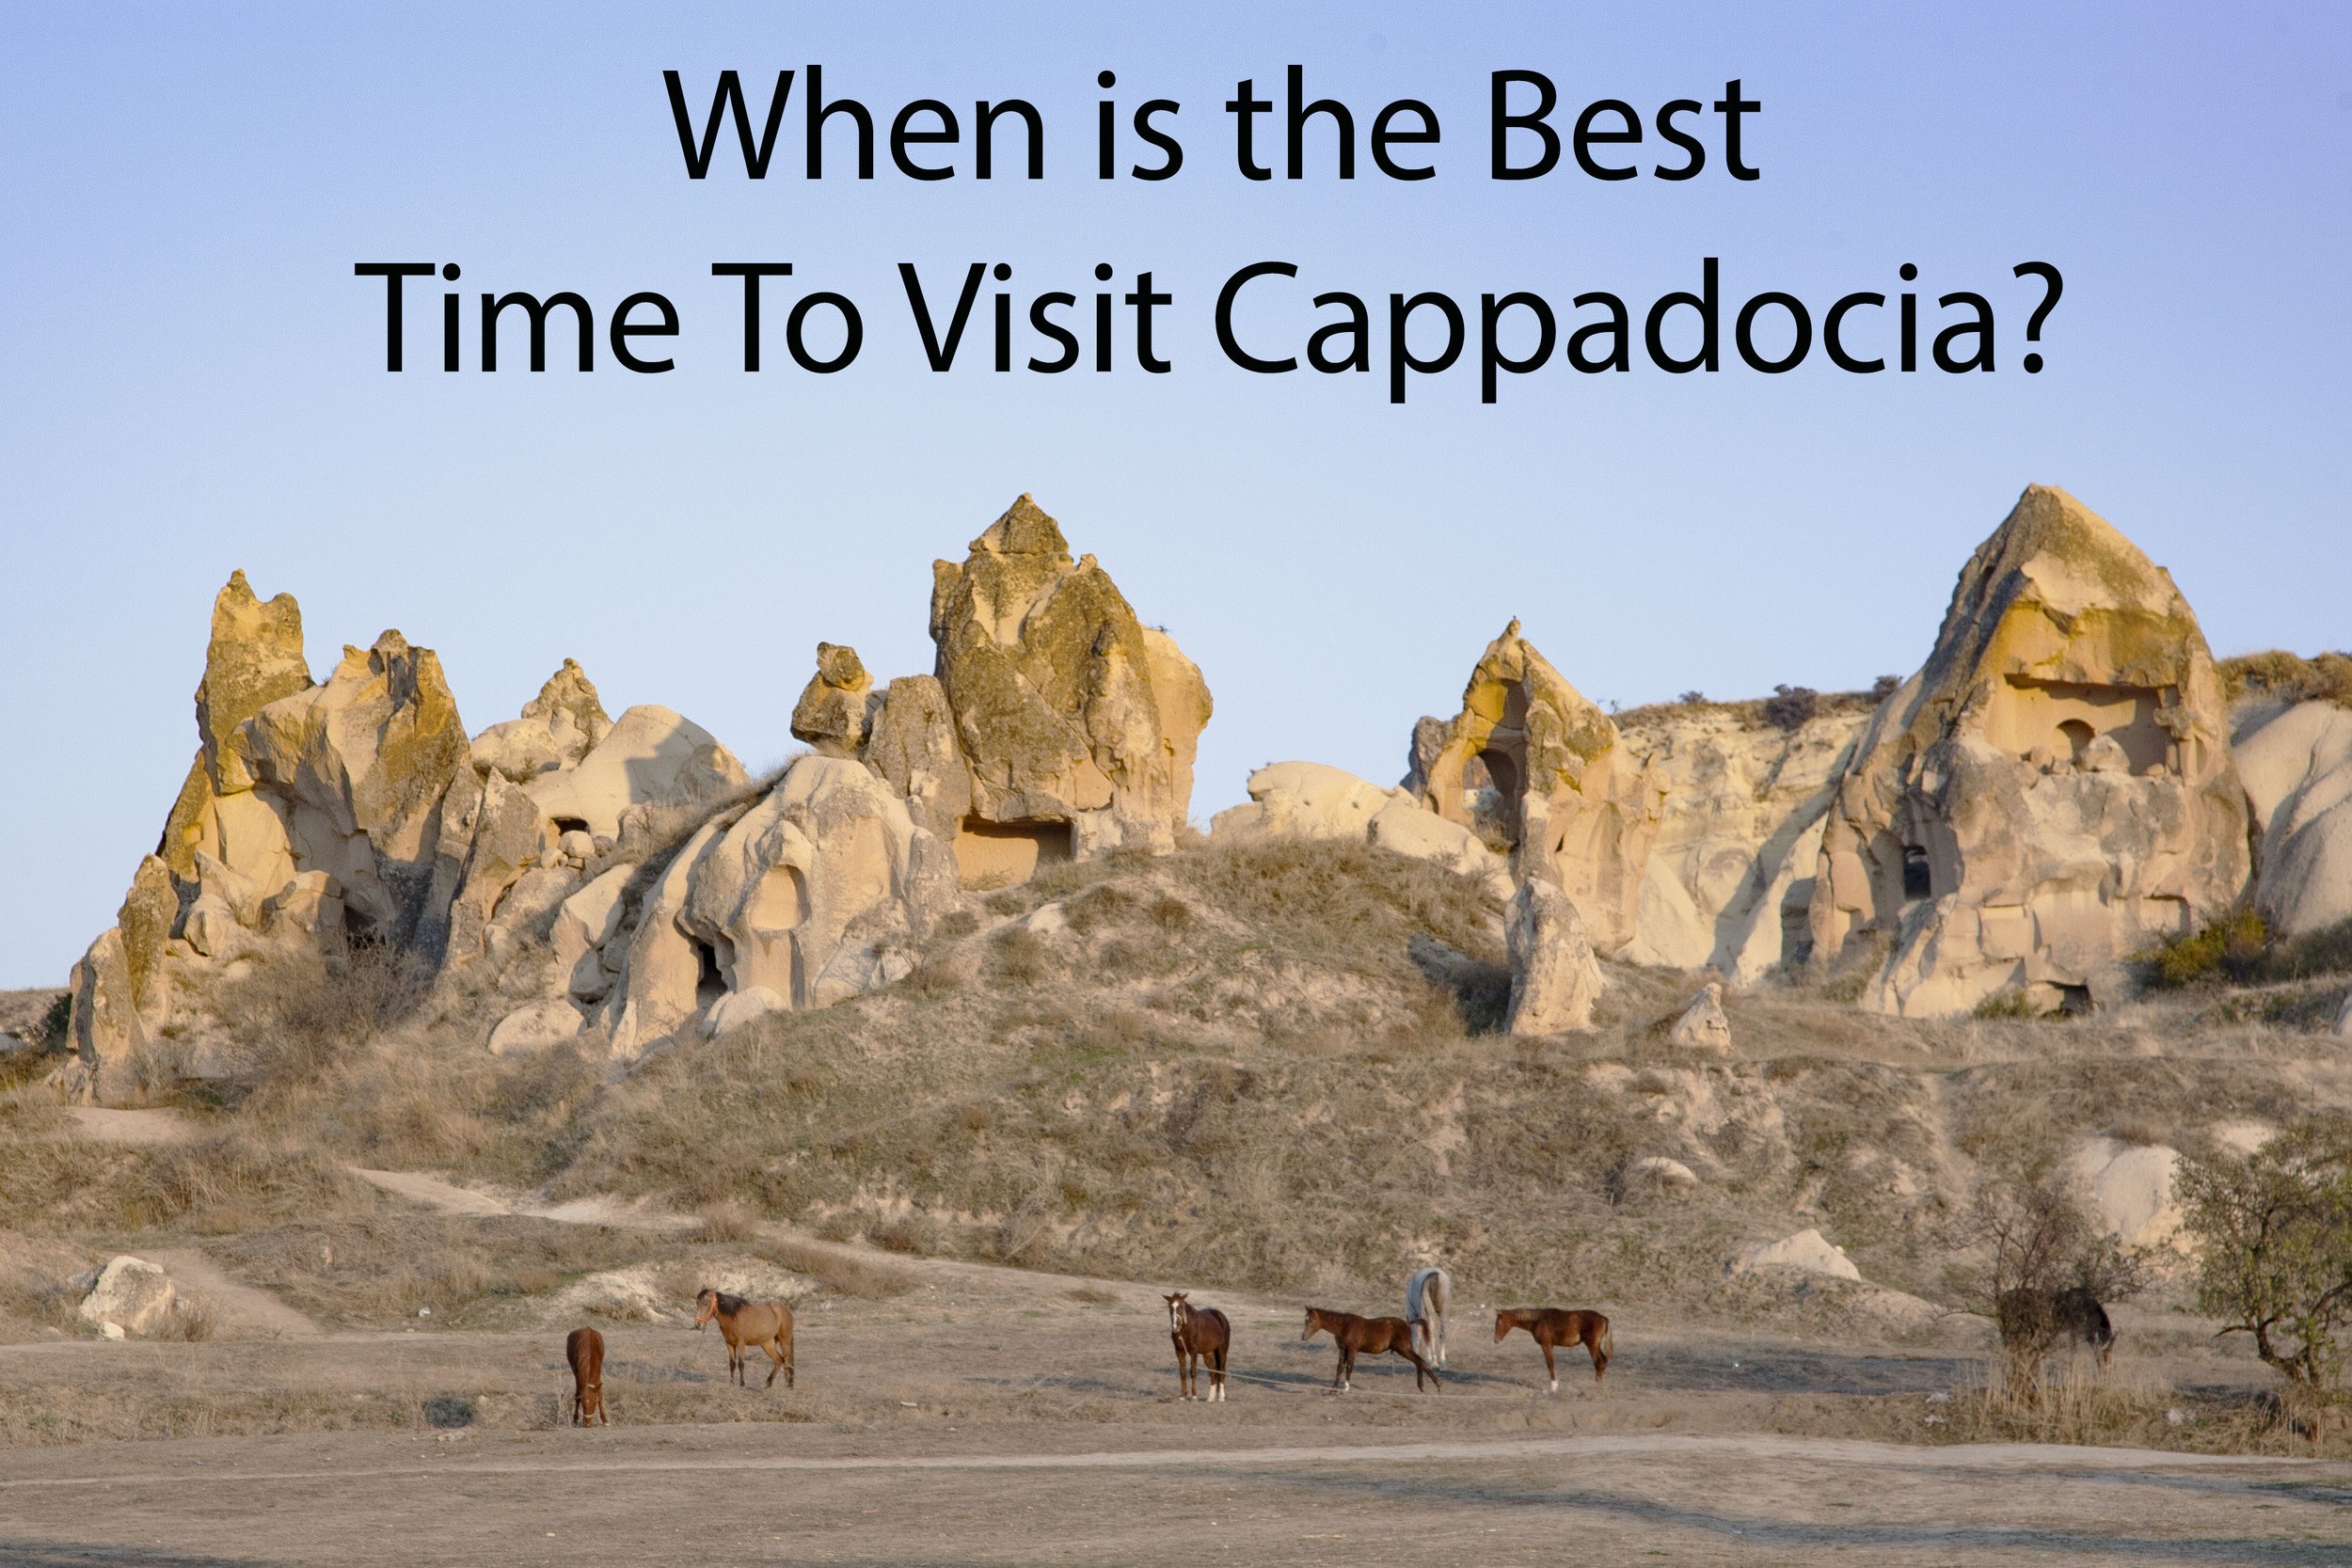 When is the best time to visit Cappadocia?